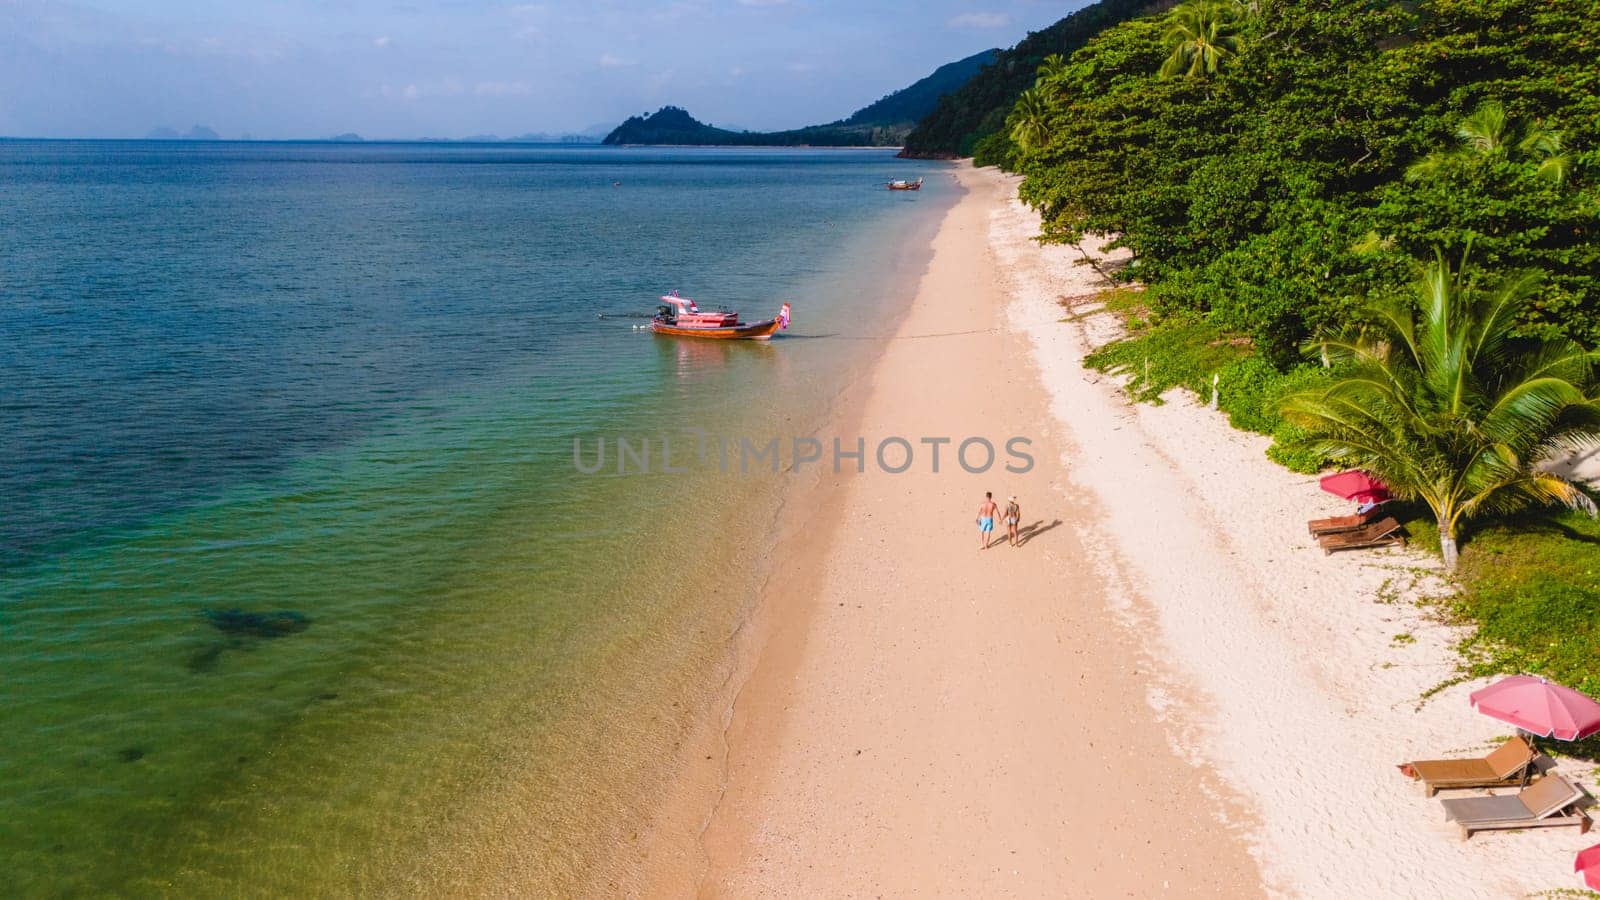 A beautiful view of a calm beach with crystal clear water on the blue sky at Koh Libong, Trang province, Thailand, Andaman Sea. A couple of men and woman walking on the beach